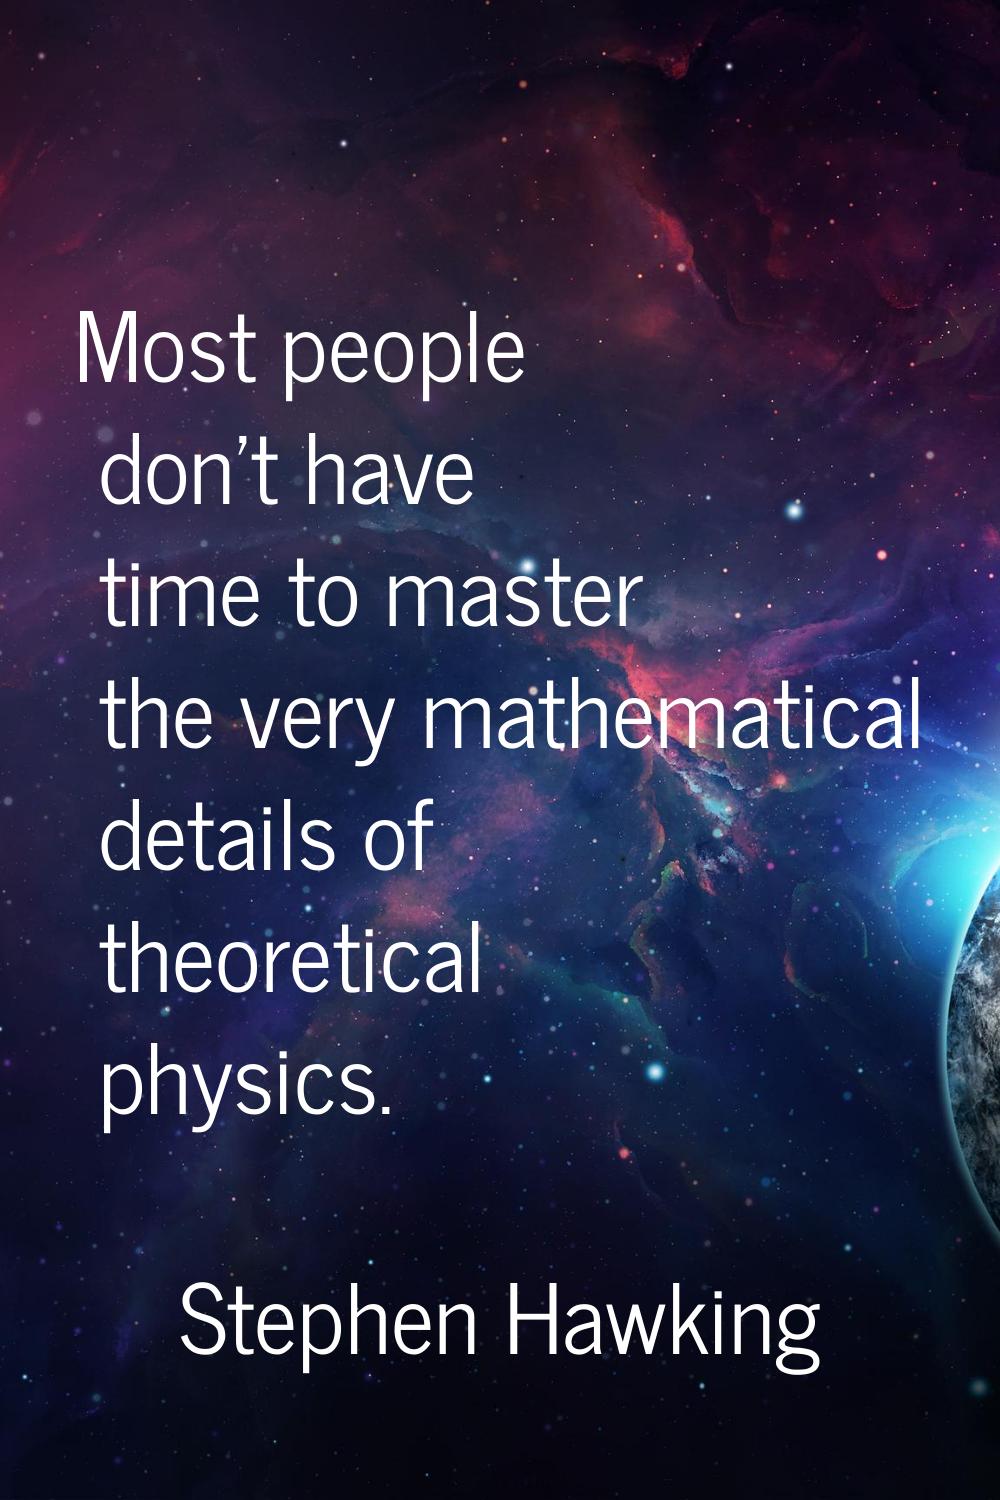 Most people don't have time to master the very mathematical details of theoretical physics.